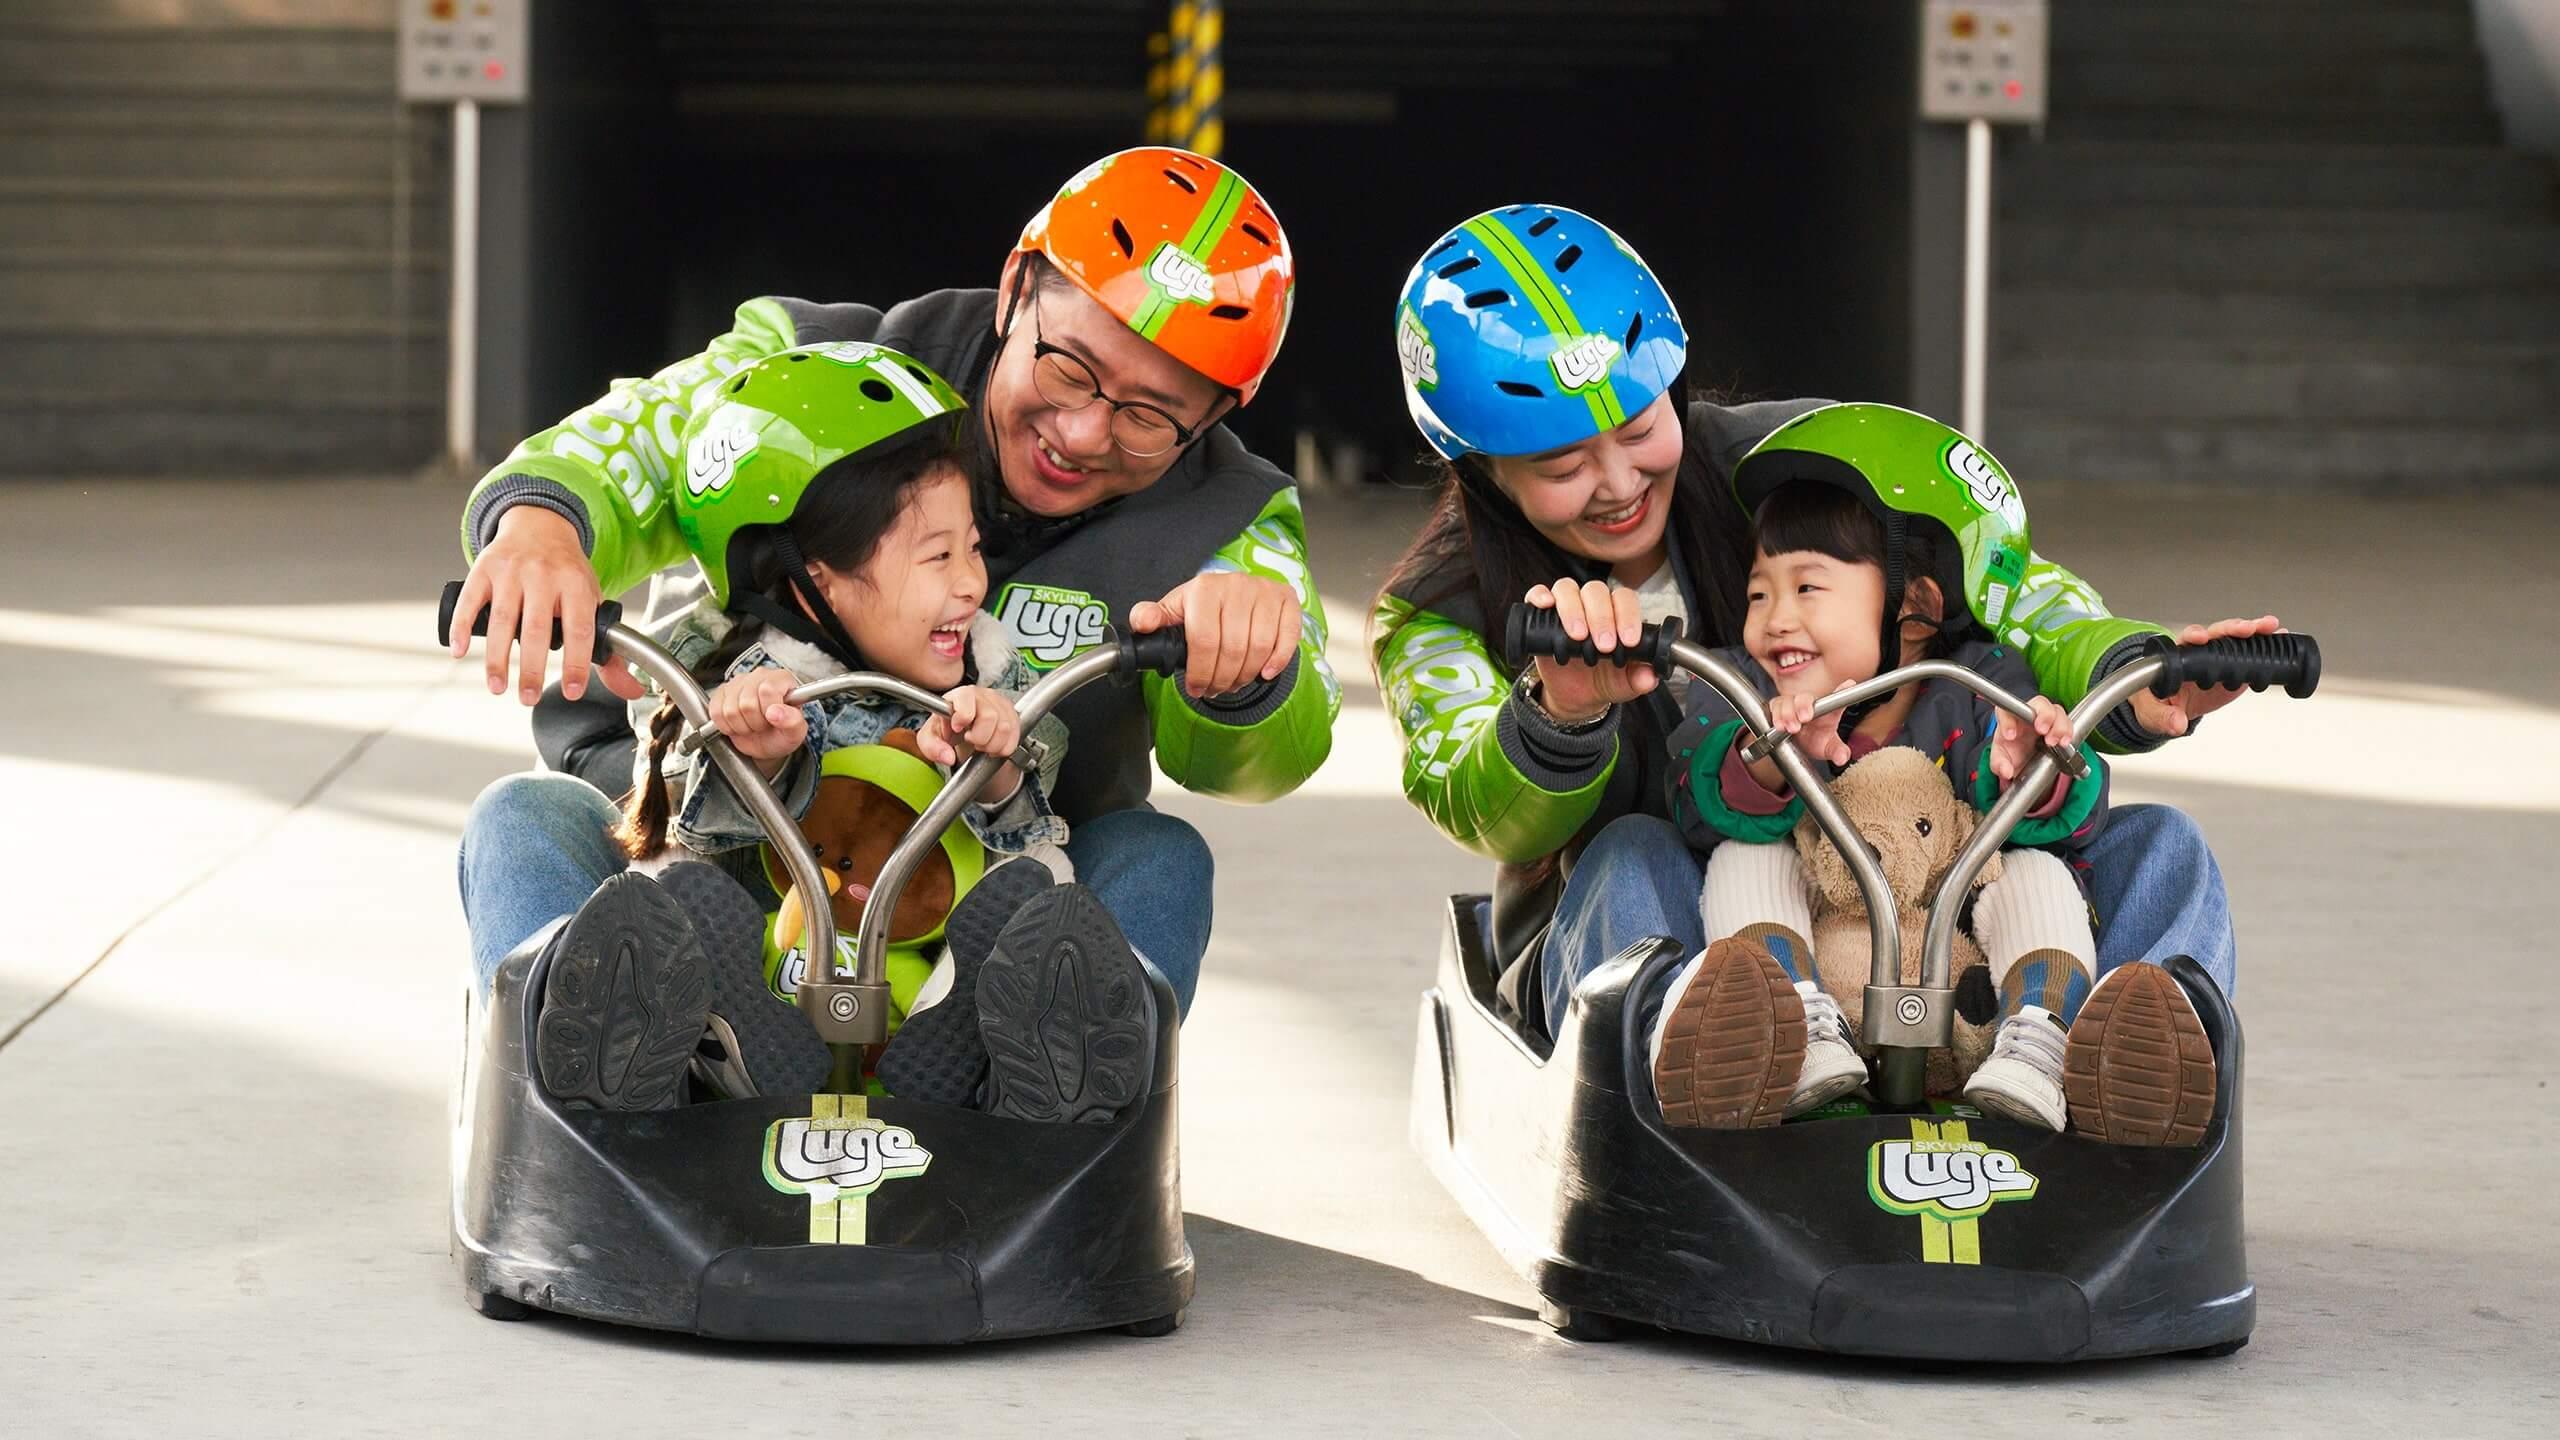 Two adults prepare to ride the Luge with small children in the same carts with them.